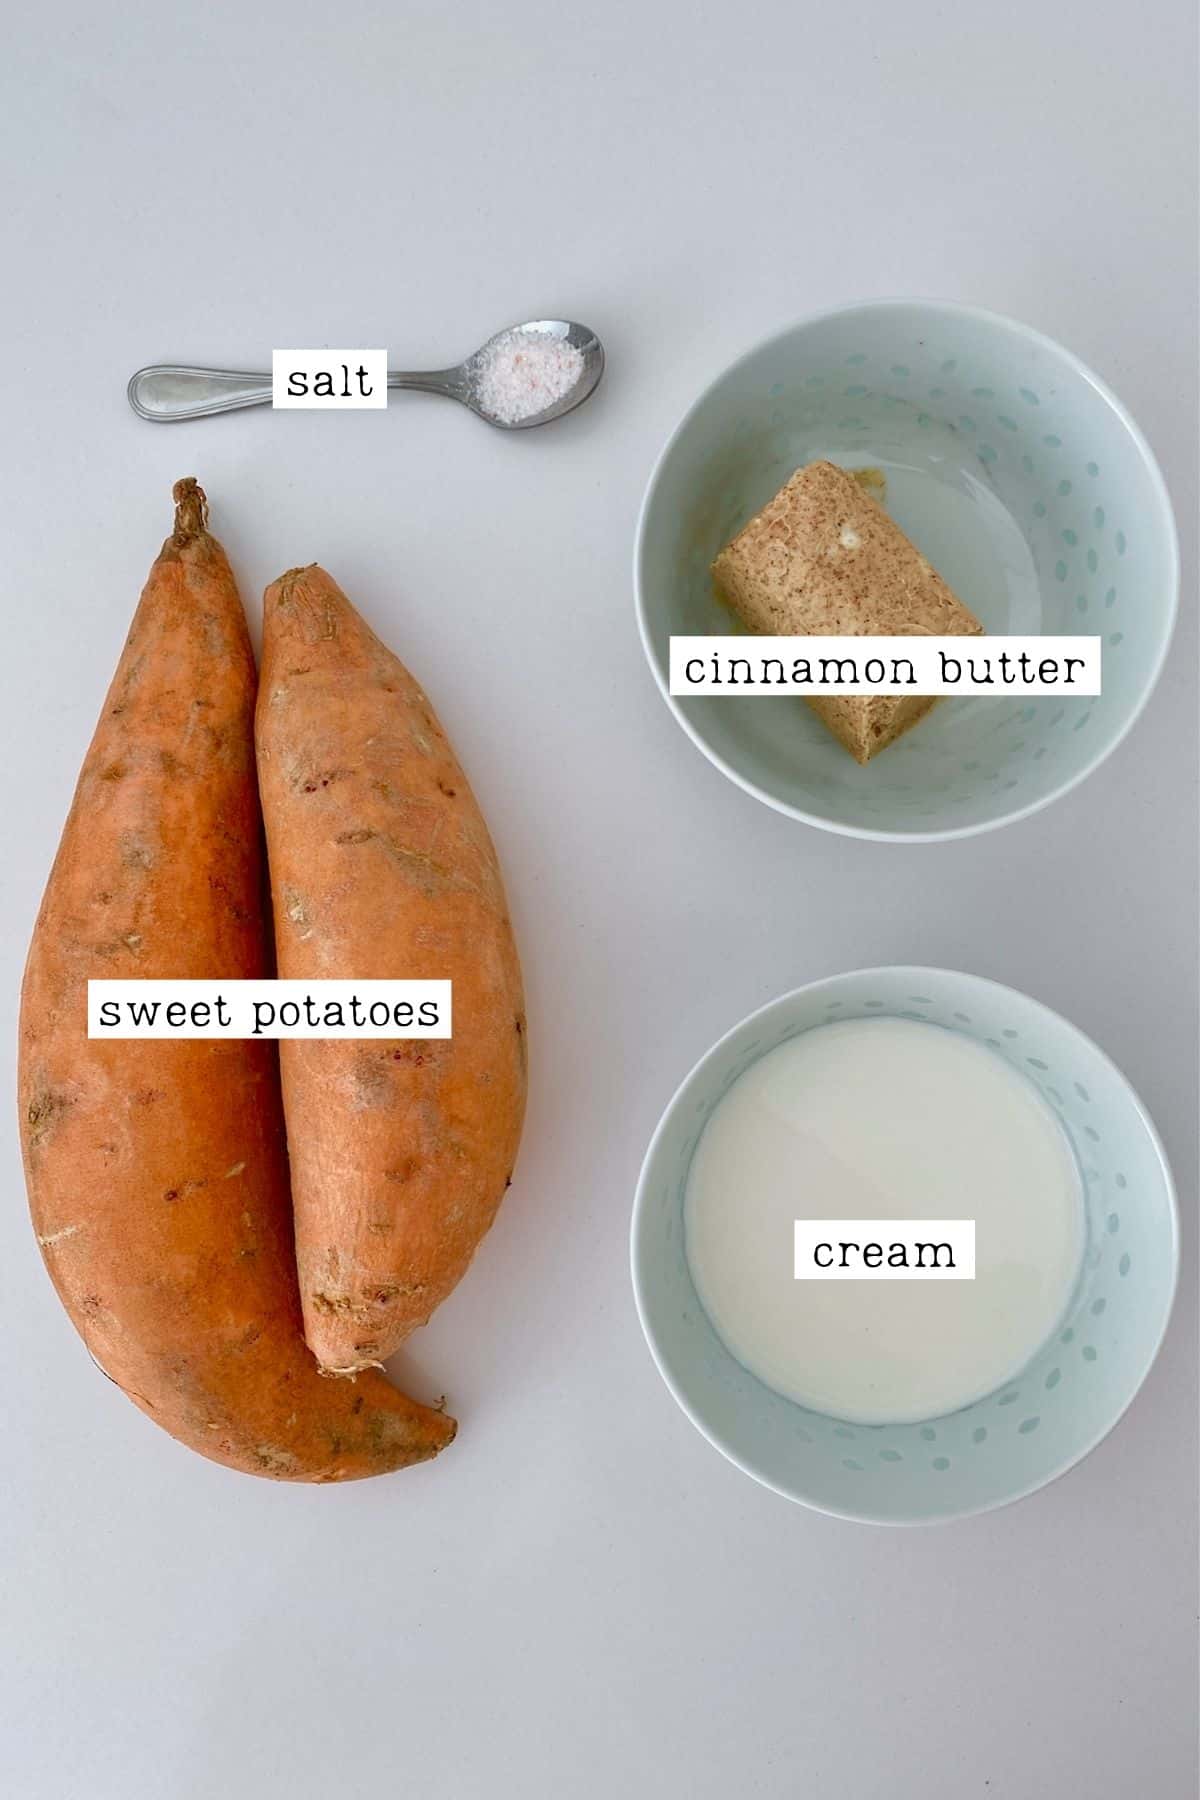 Ingredients for mashed sweet potatoes